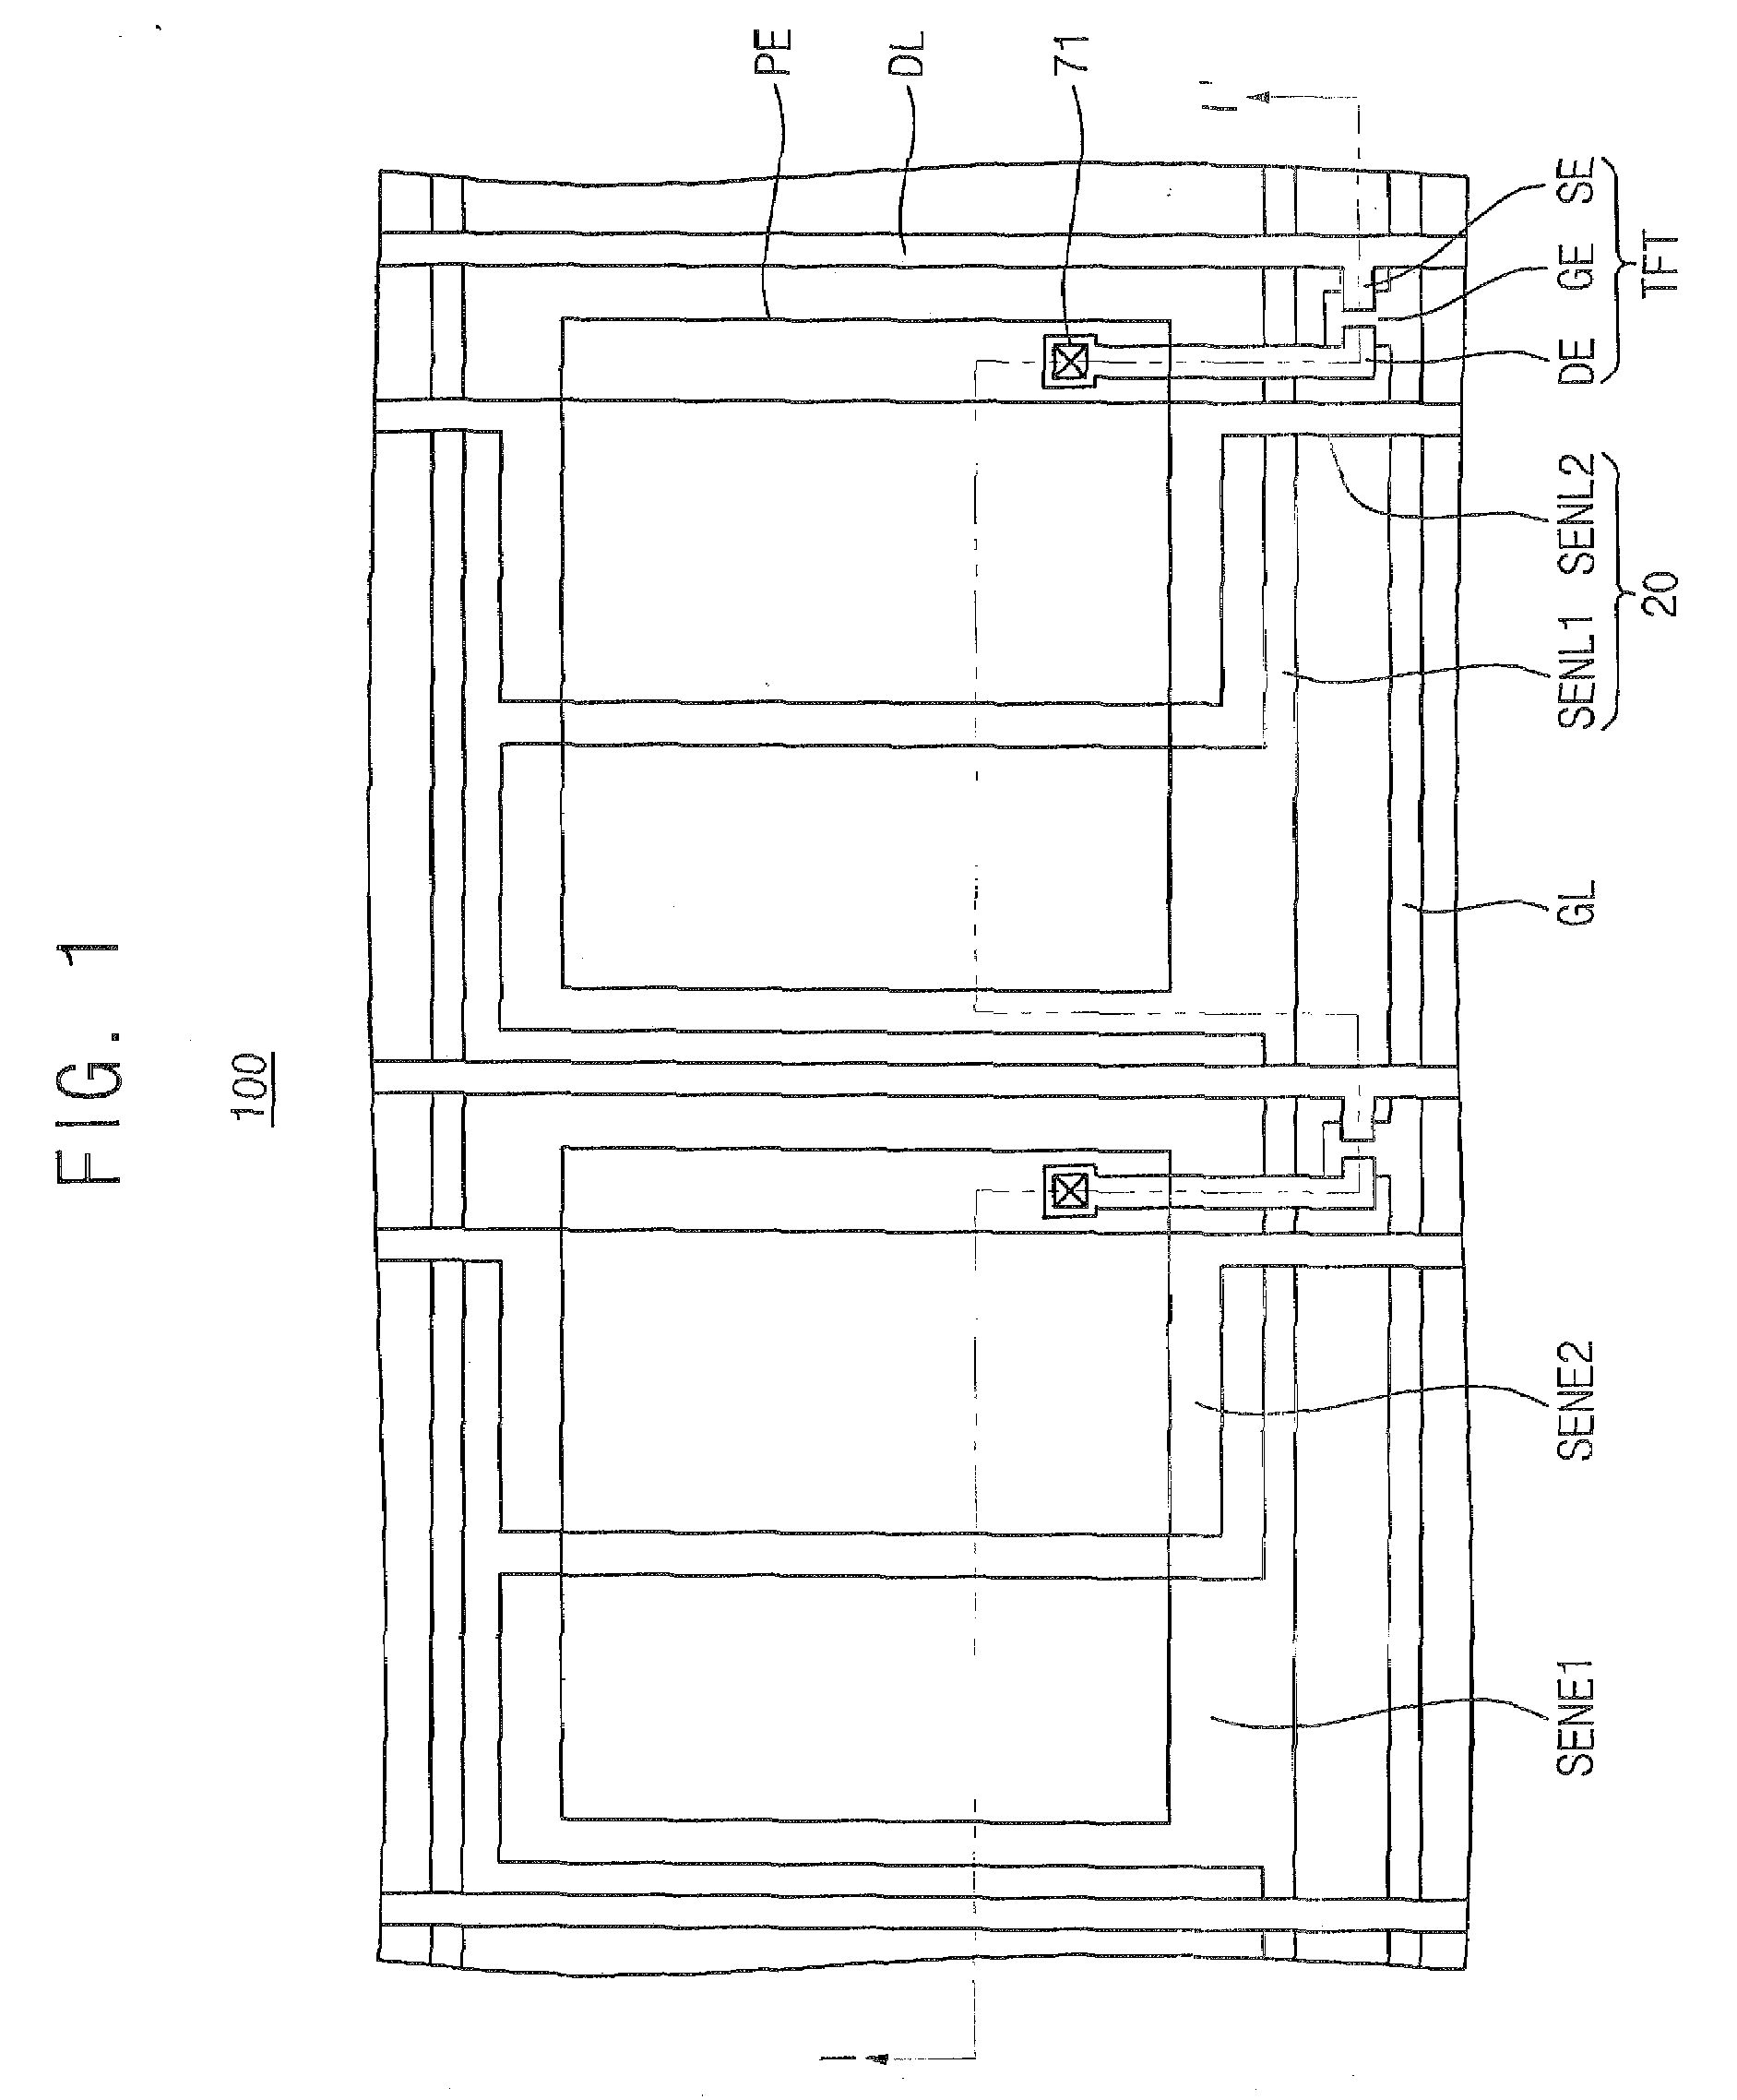 Touch screen display device and method of manufacturing the same